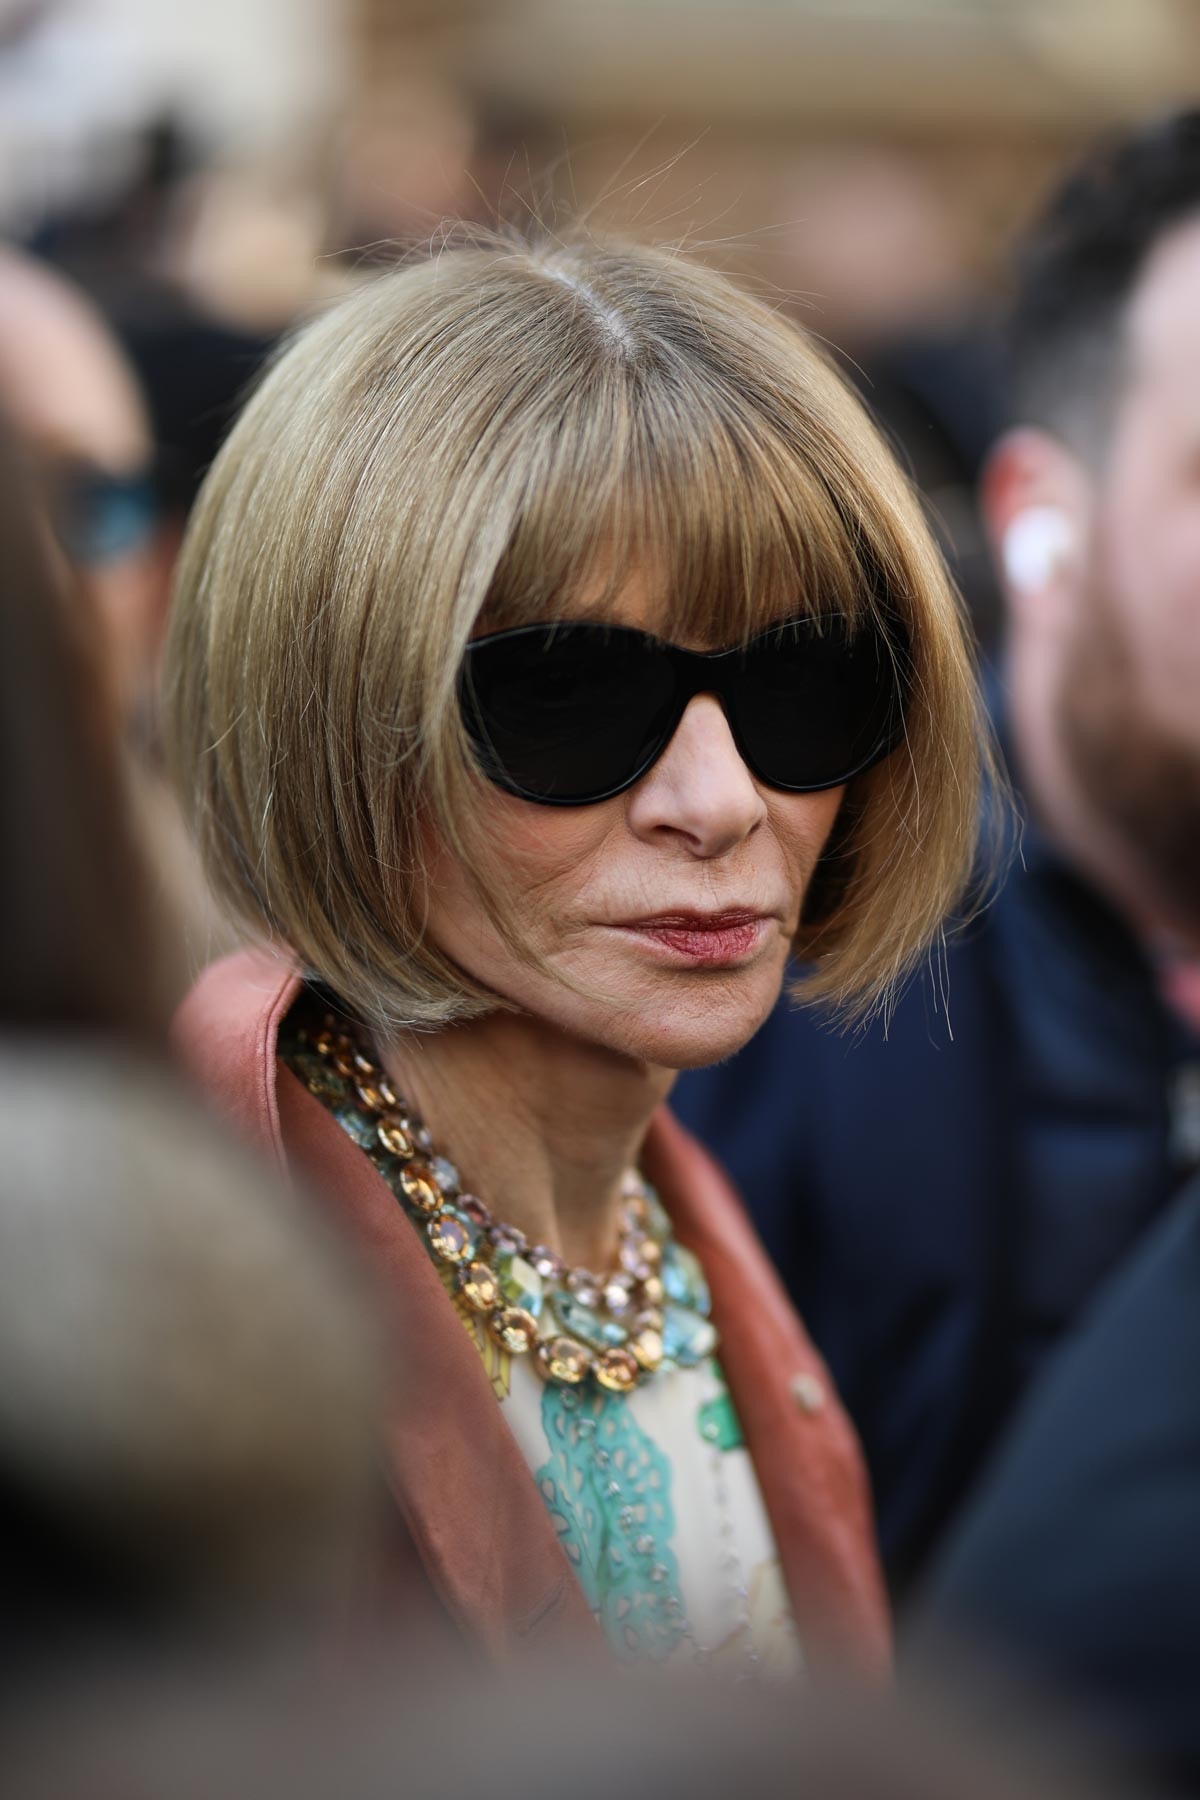 Anna Wintour 77 USD Vegetable Less Lunch Menu Steak Palm NYC Amy Odell Book Info